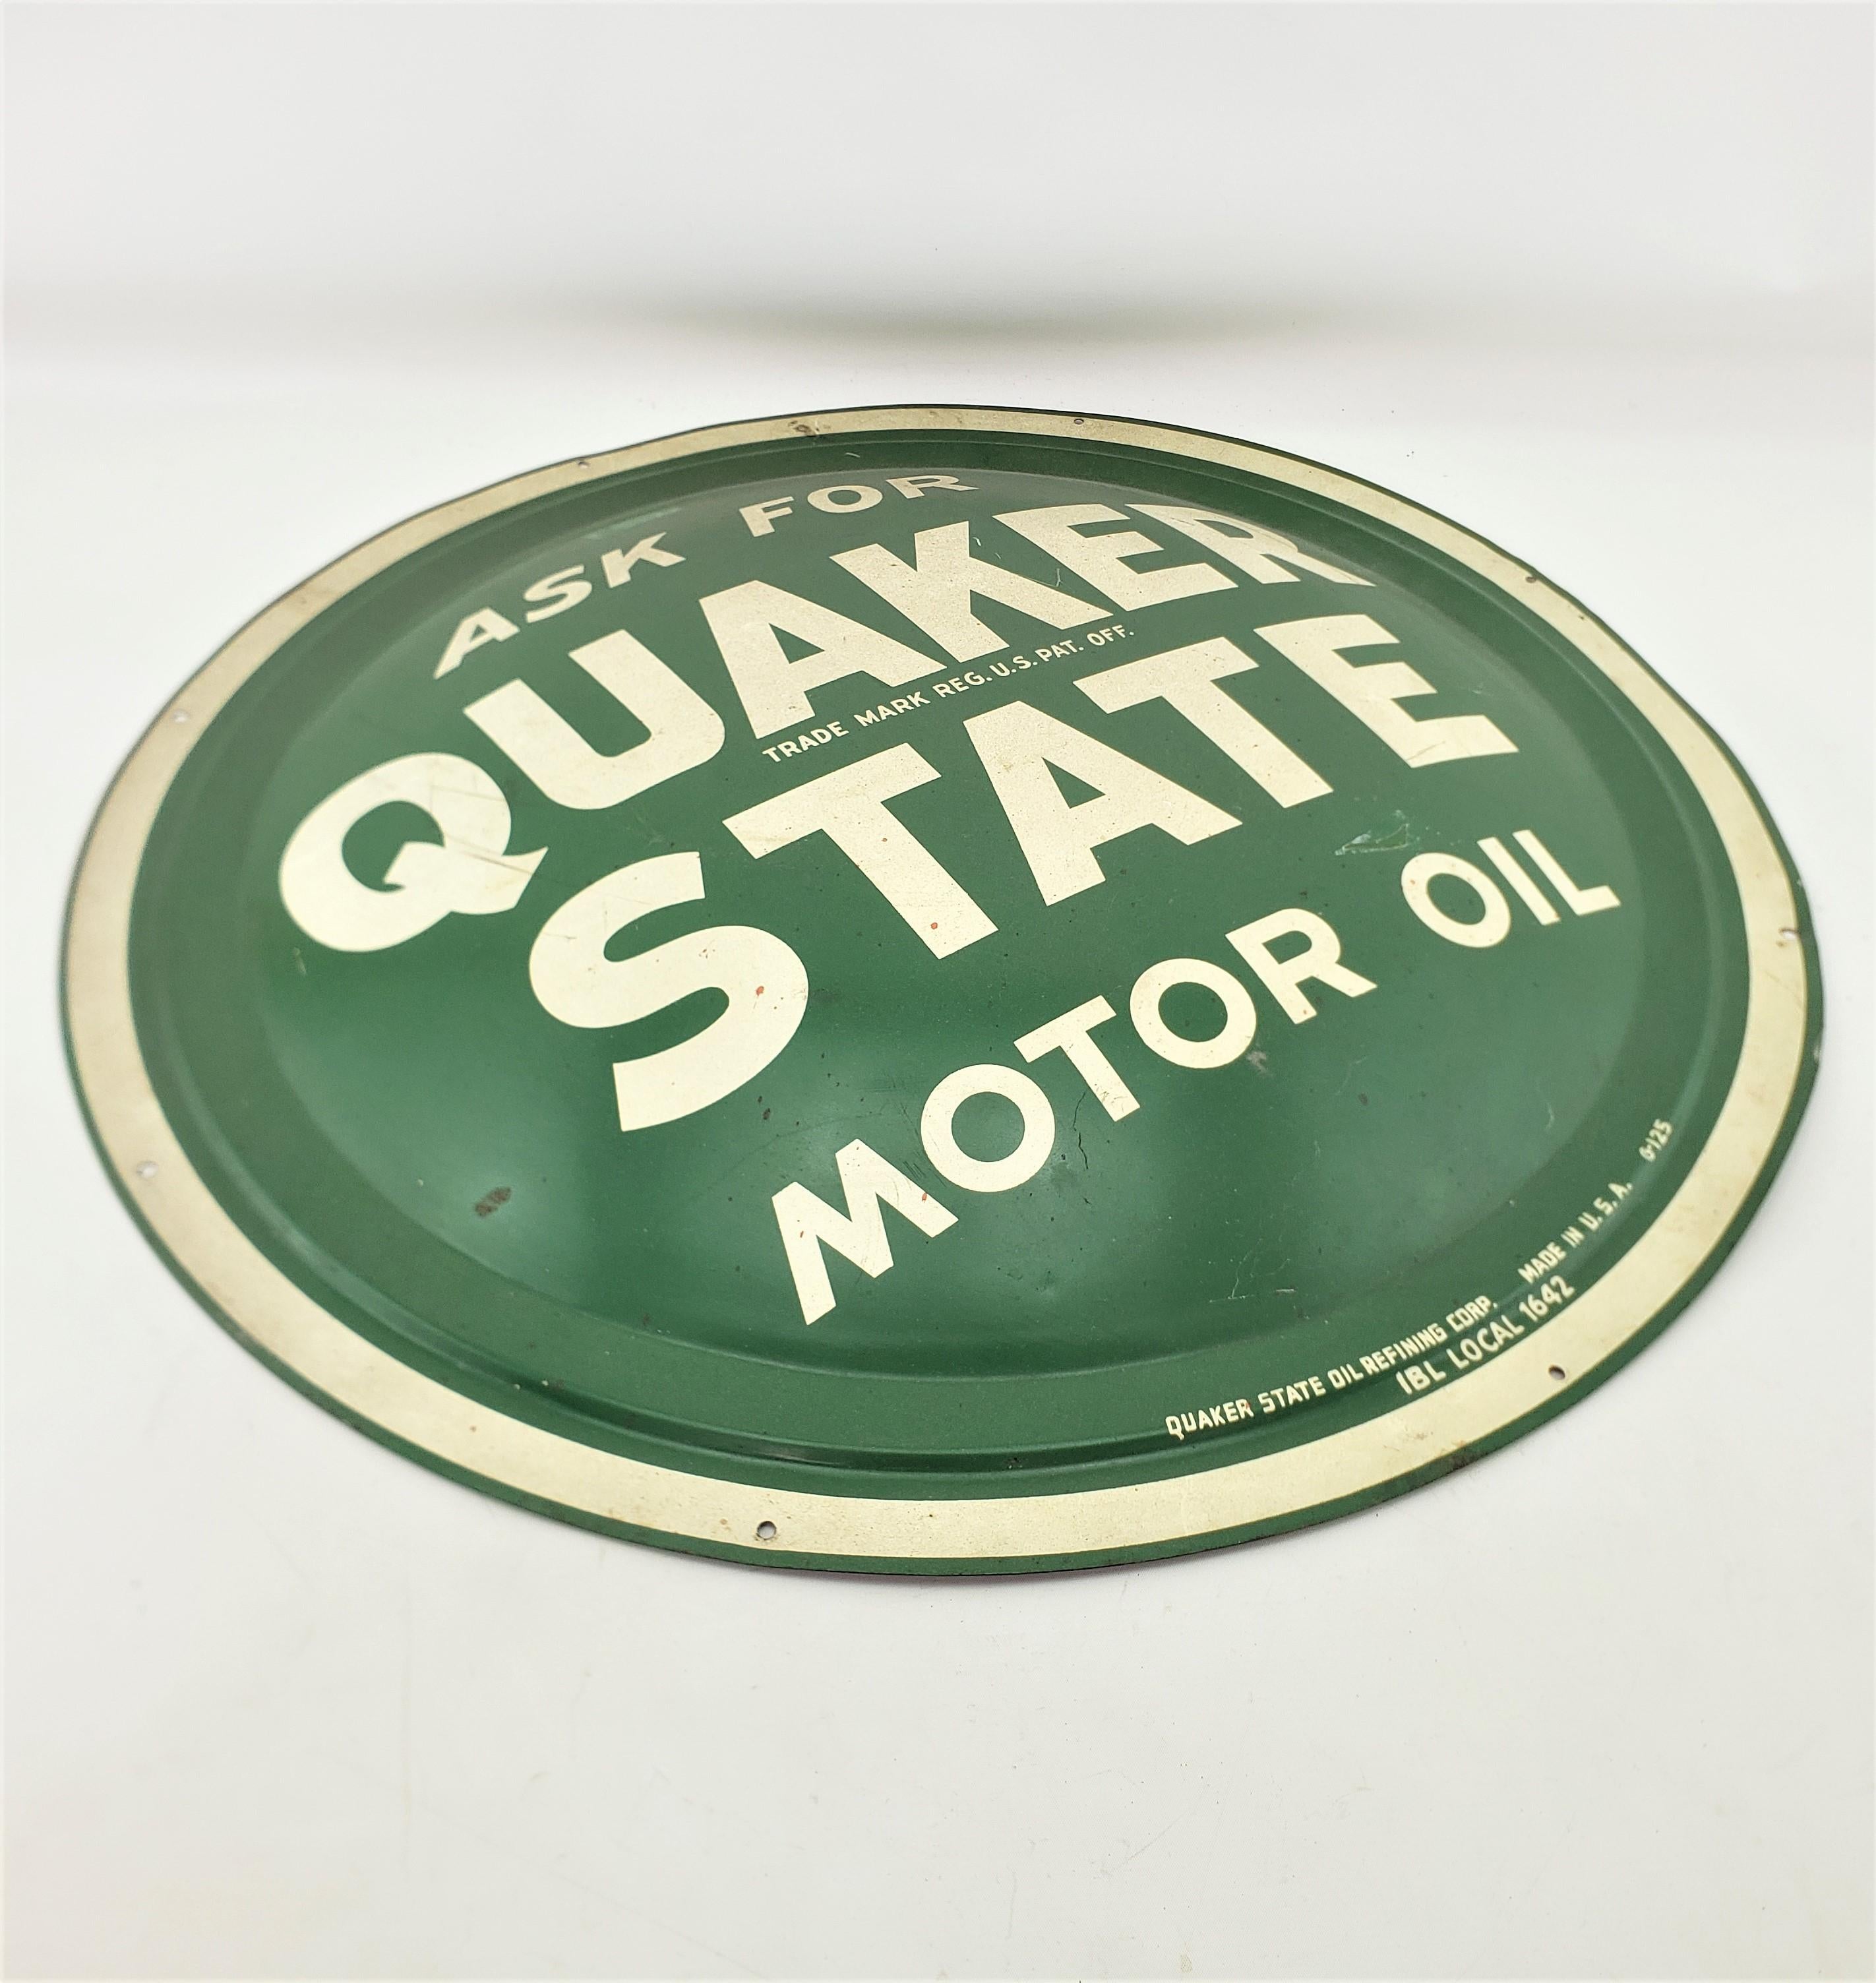 Midcentury Quaker State Motor Oil Gas Station Metal Advertising 'Button' Sign In Good Condition In Hamilton, Ontario